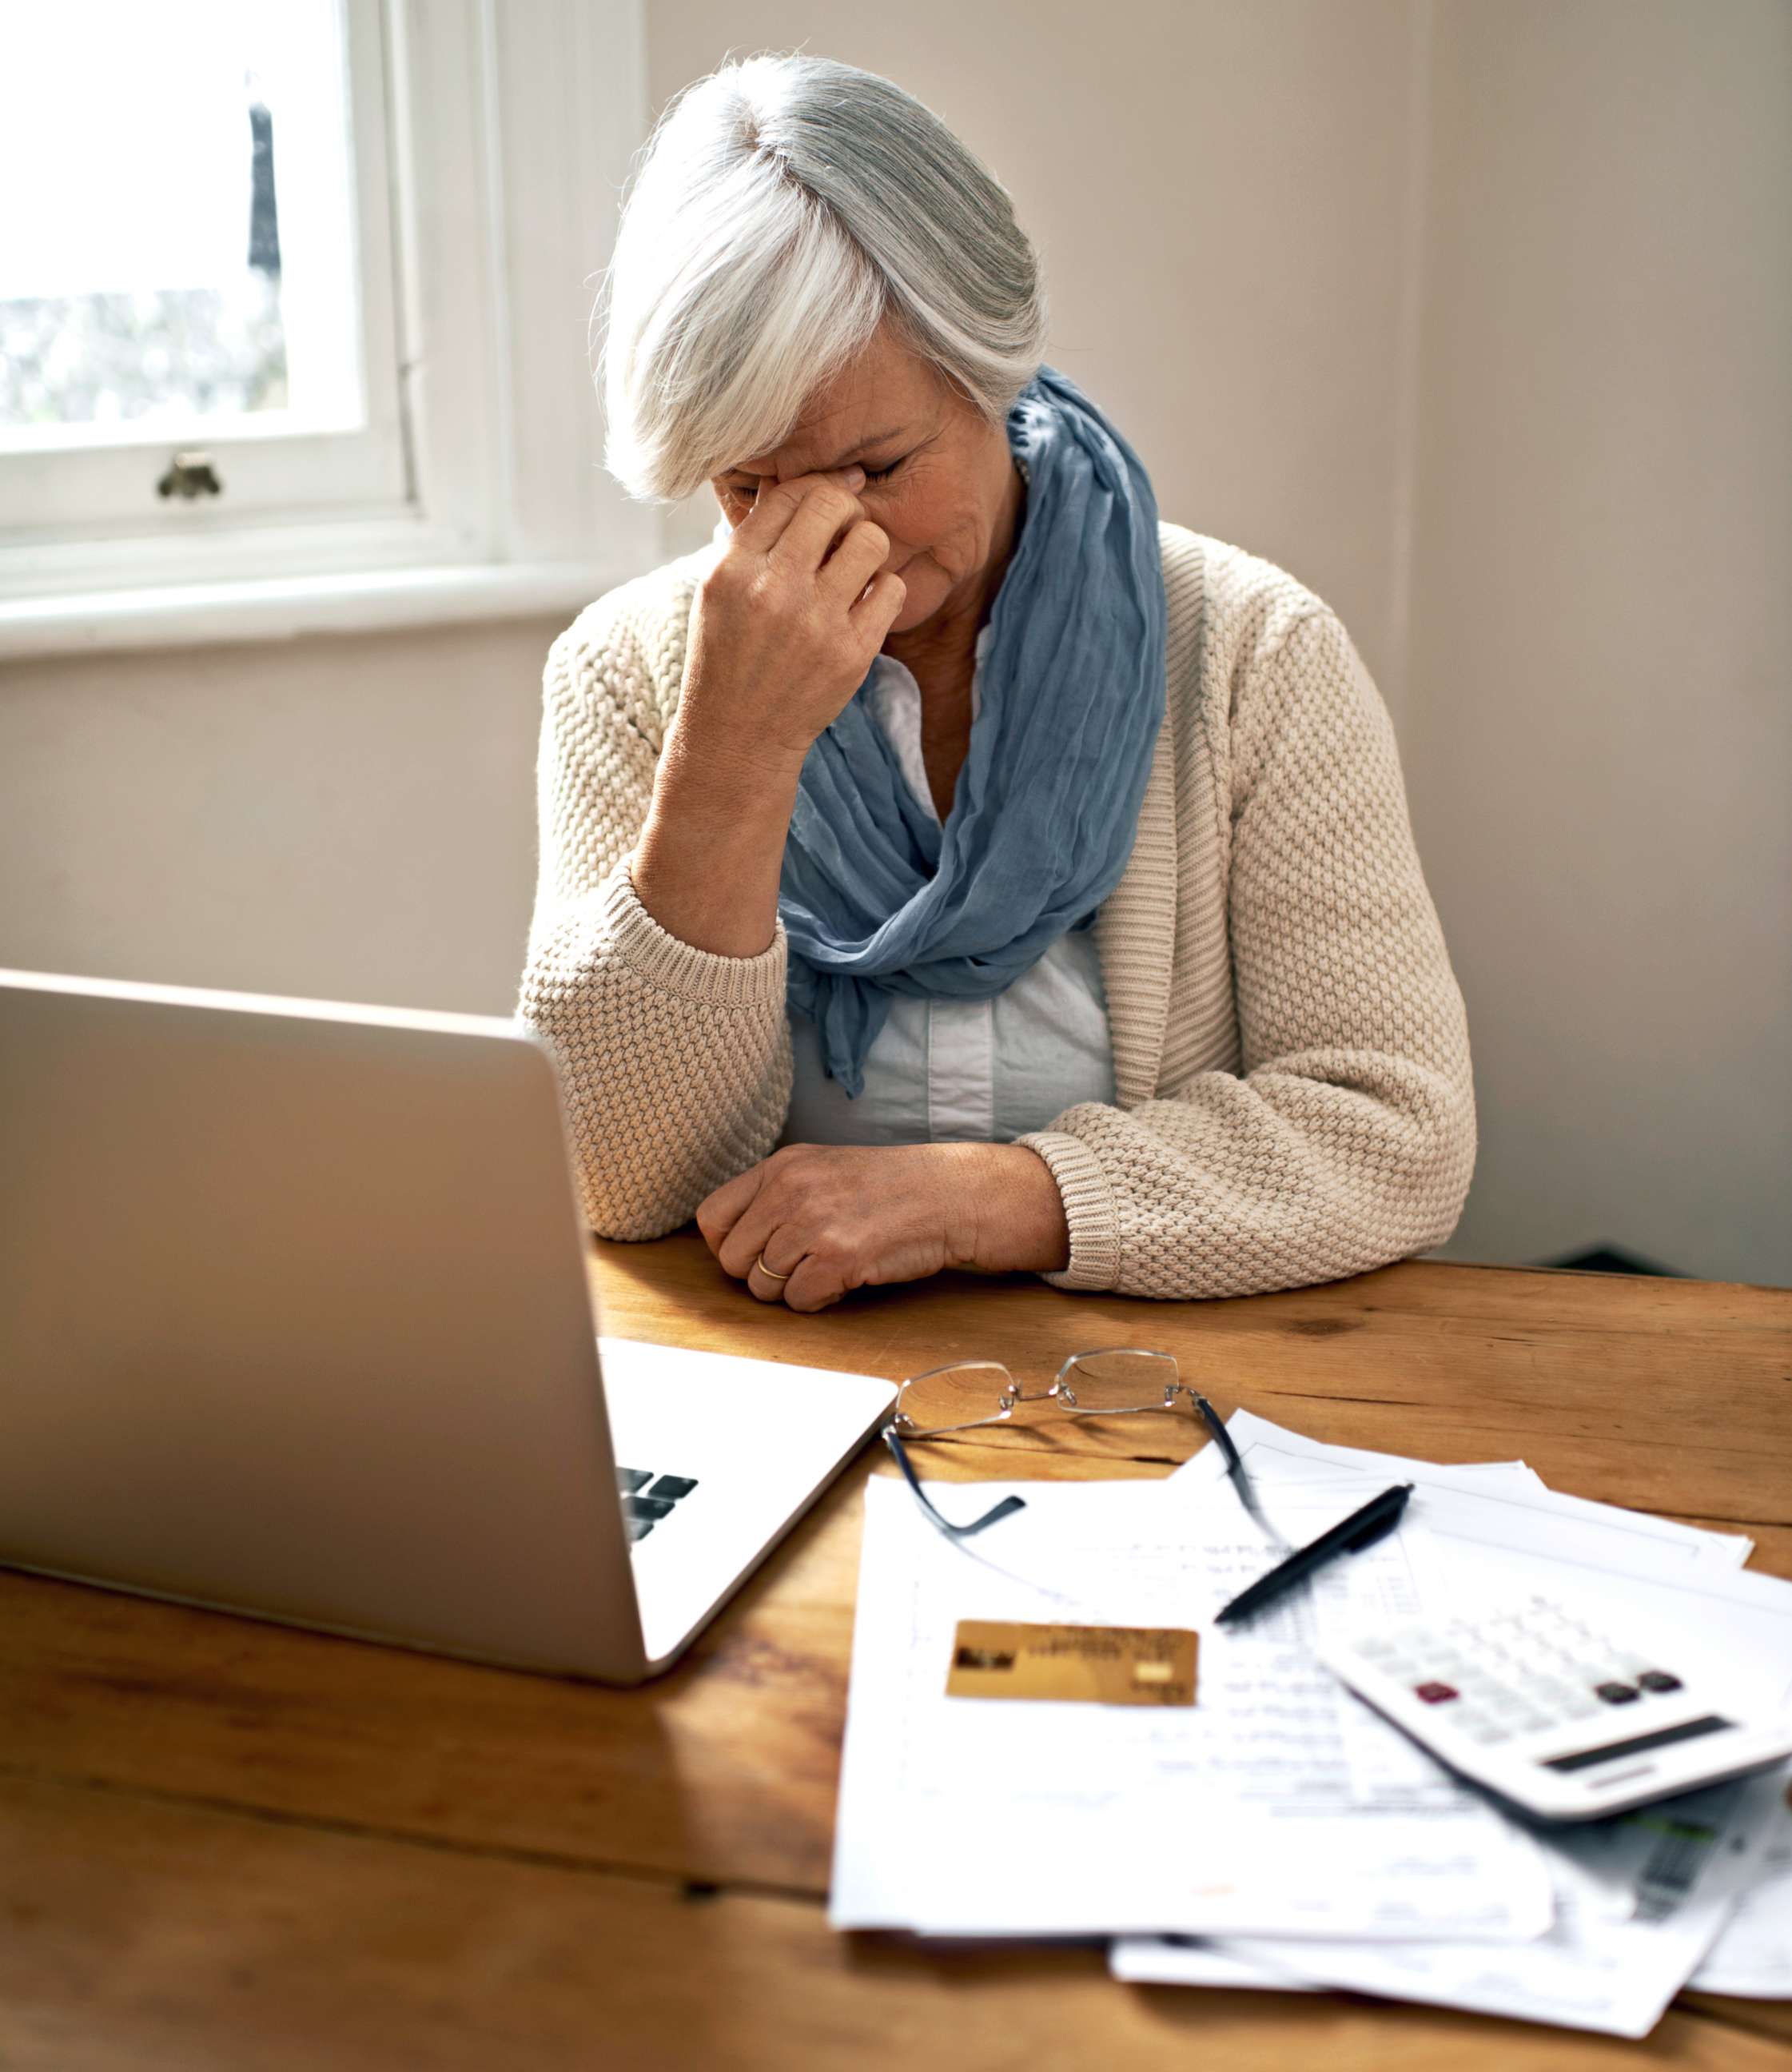 PHOTO: A senior woman sitting in front of a laptop and bills appears in this undated stock photo.